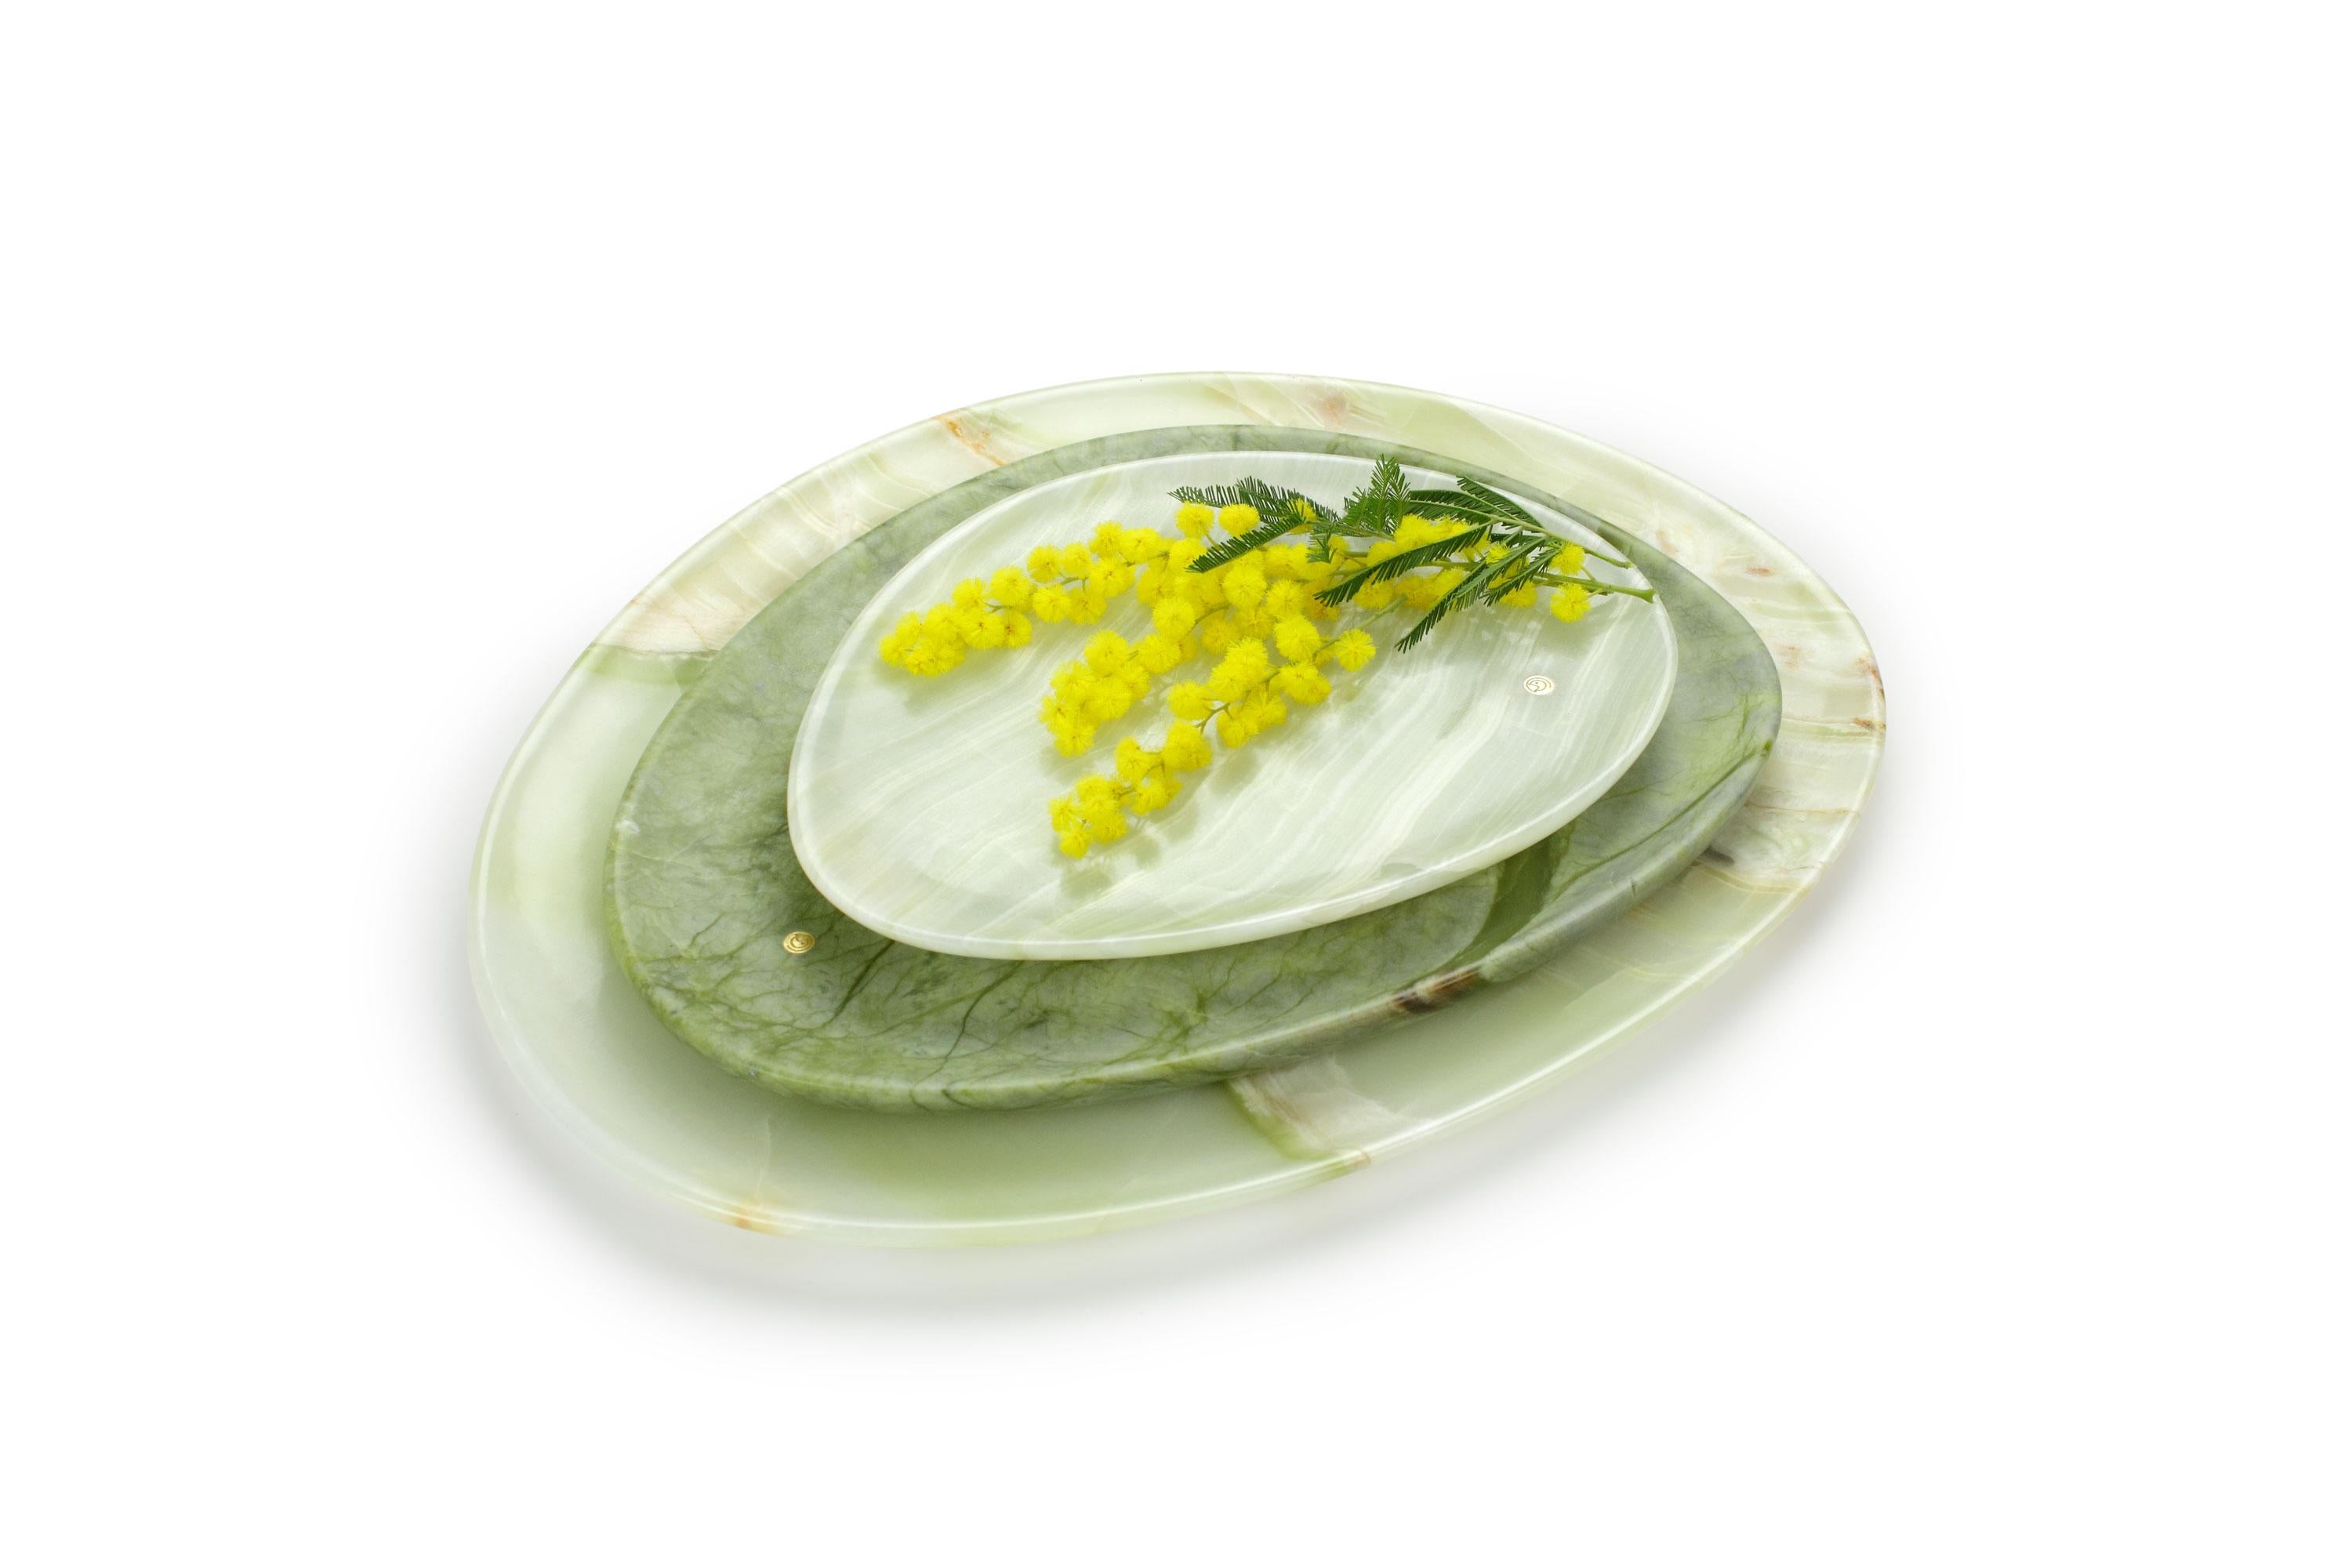 Hand carved presentation plates in green onyx and Green Ming. 
Multiple use as plates, platters and placers. 

Dimensions: Small - L 24 W 20 H 1.8 cm, Medium - L 30 W 28 H 1.8 cm, Big - L 36 W 35 H 1.8 cm.
Available in different marbles, onyx and